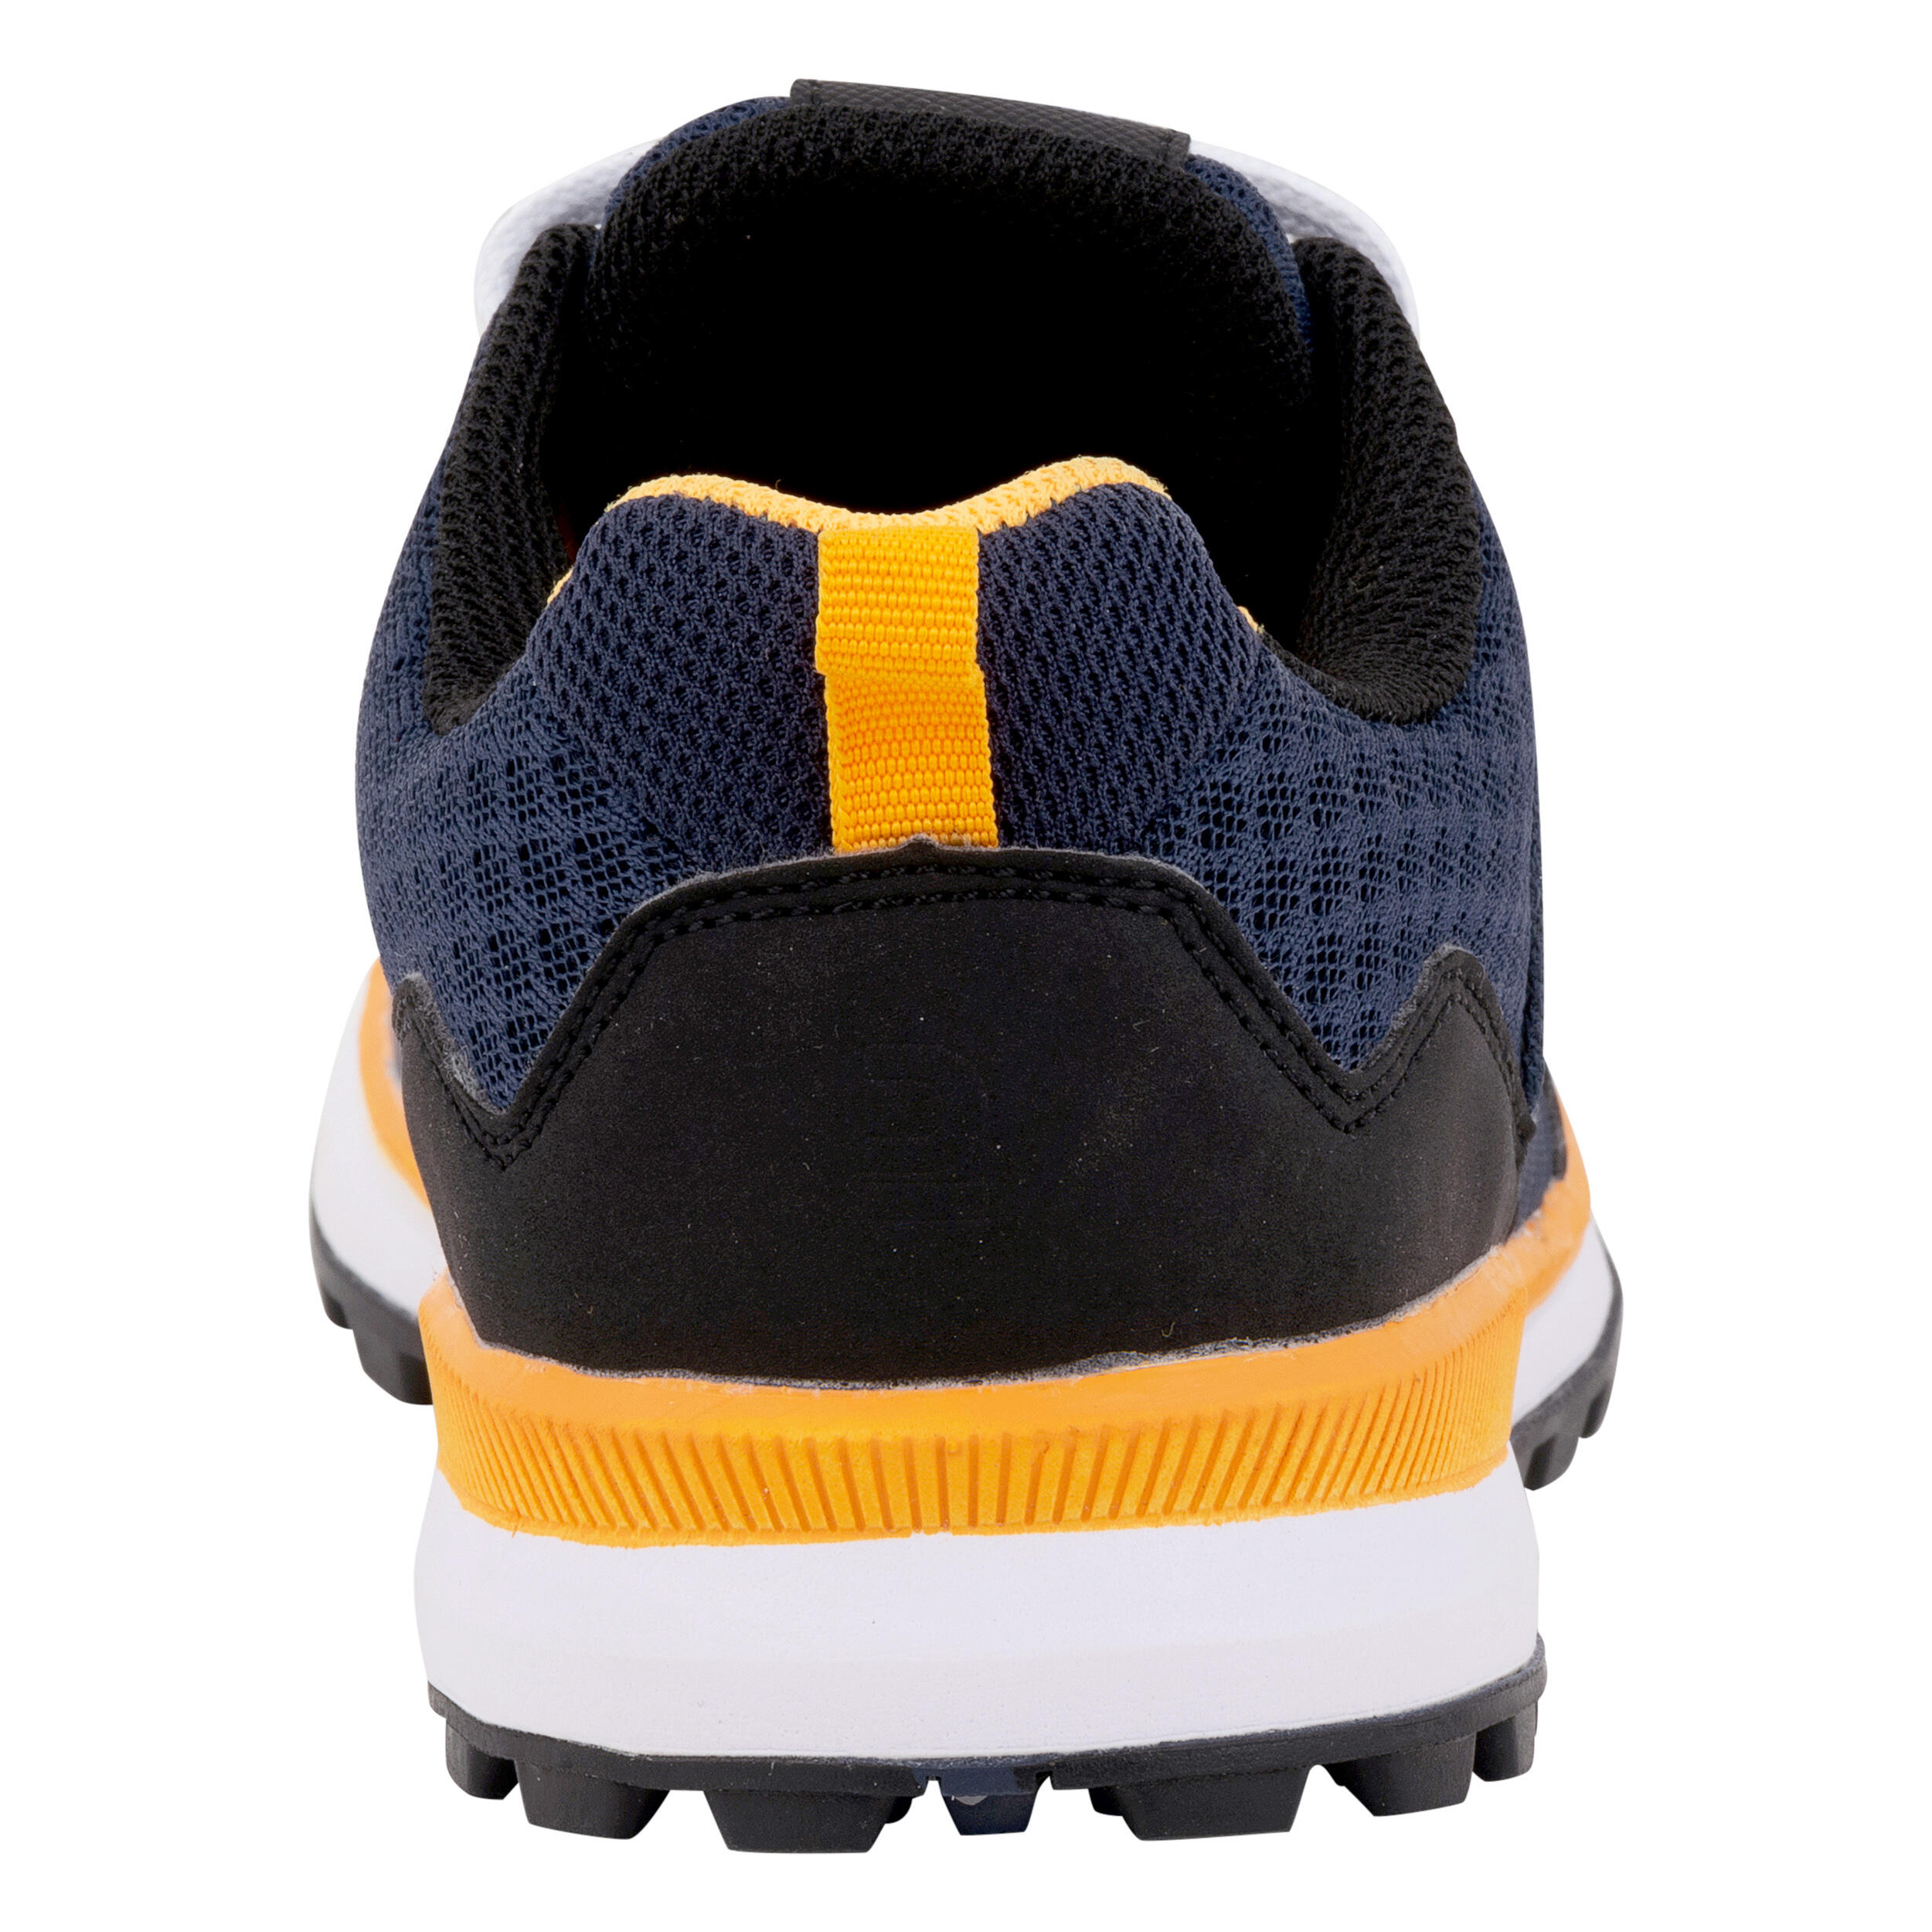 Teens' Moderate-Intensity Hockey Shoes DT500 - Blue/Yellow 4/7